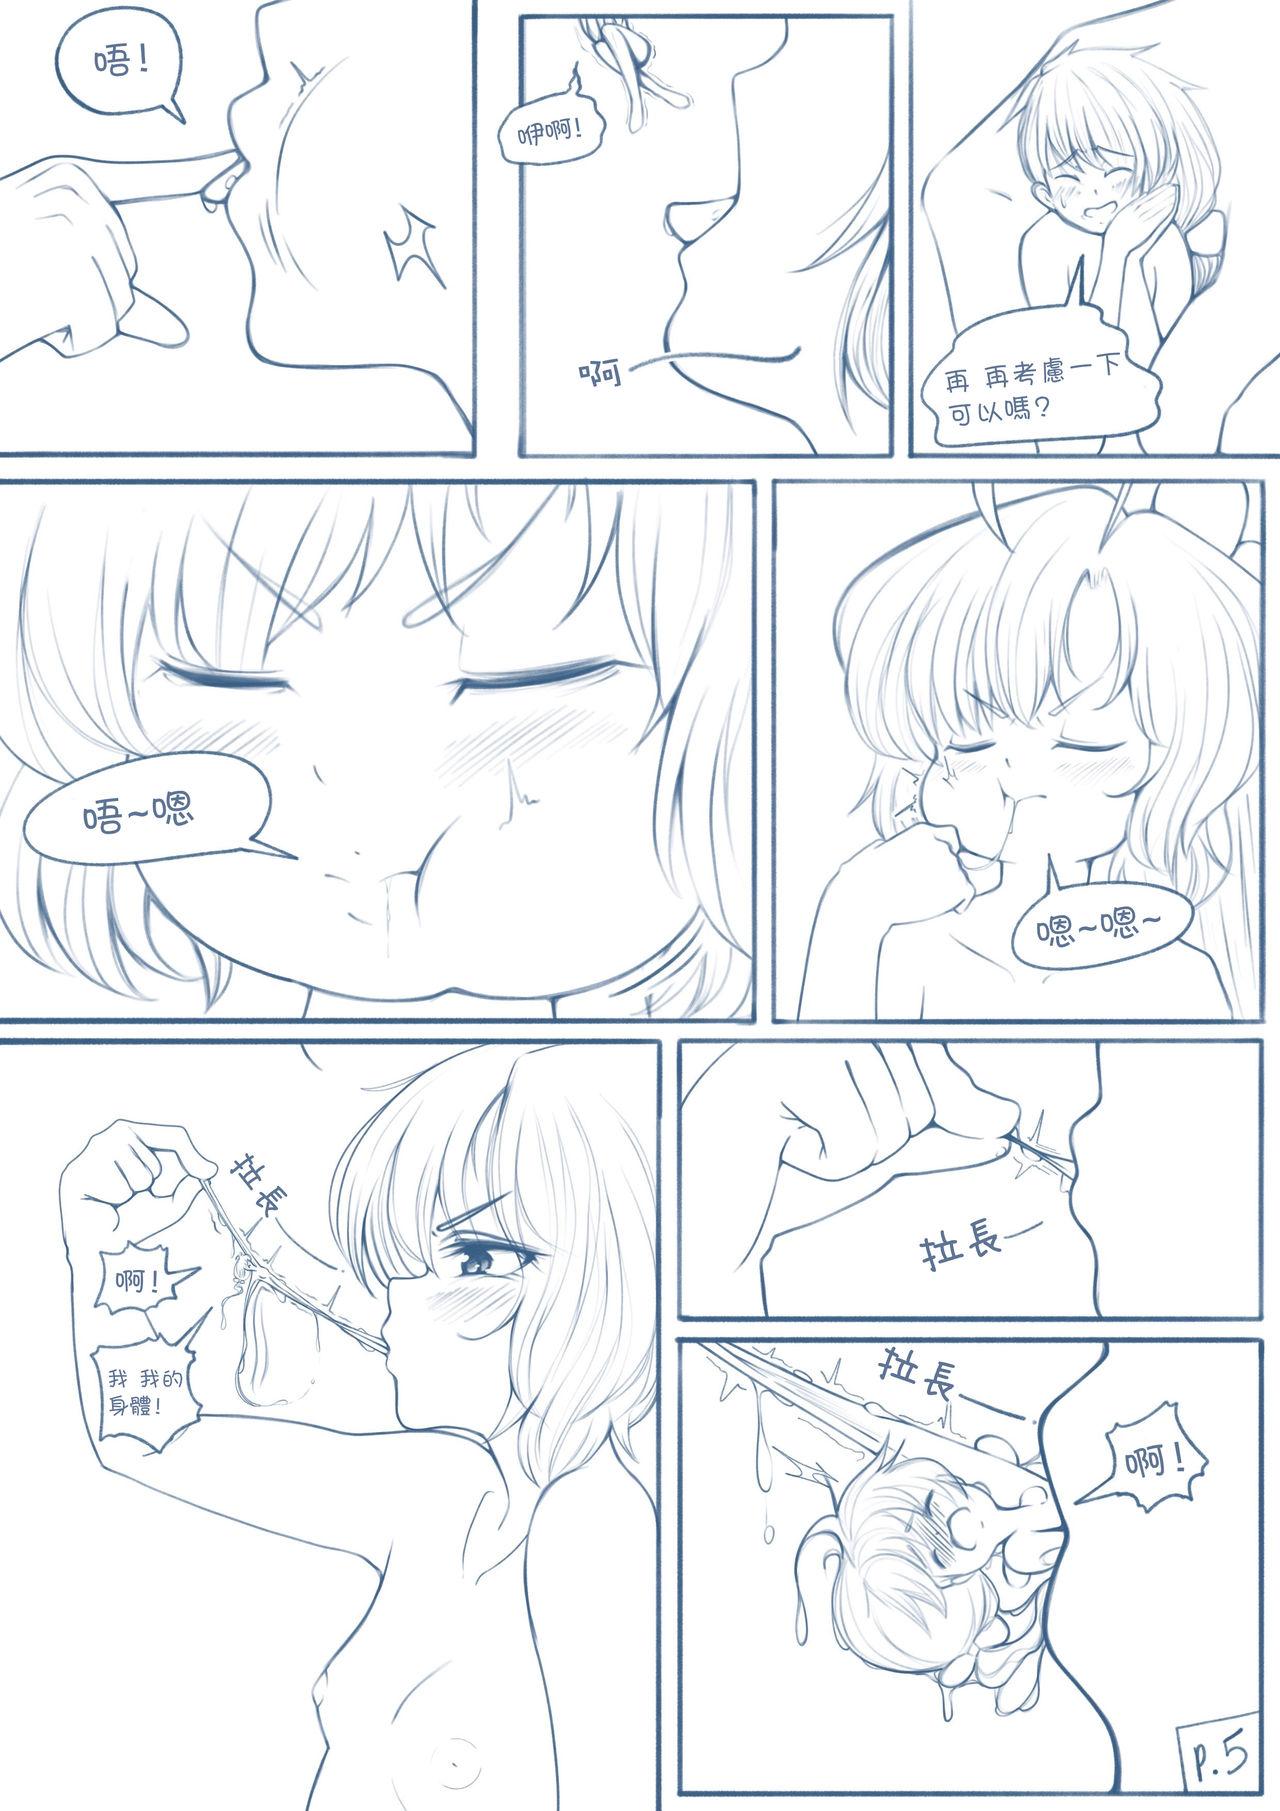 Tittyfuck The Loli Vampire part2 - Original Gay Party - Page 6